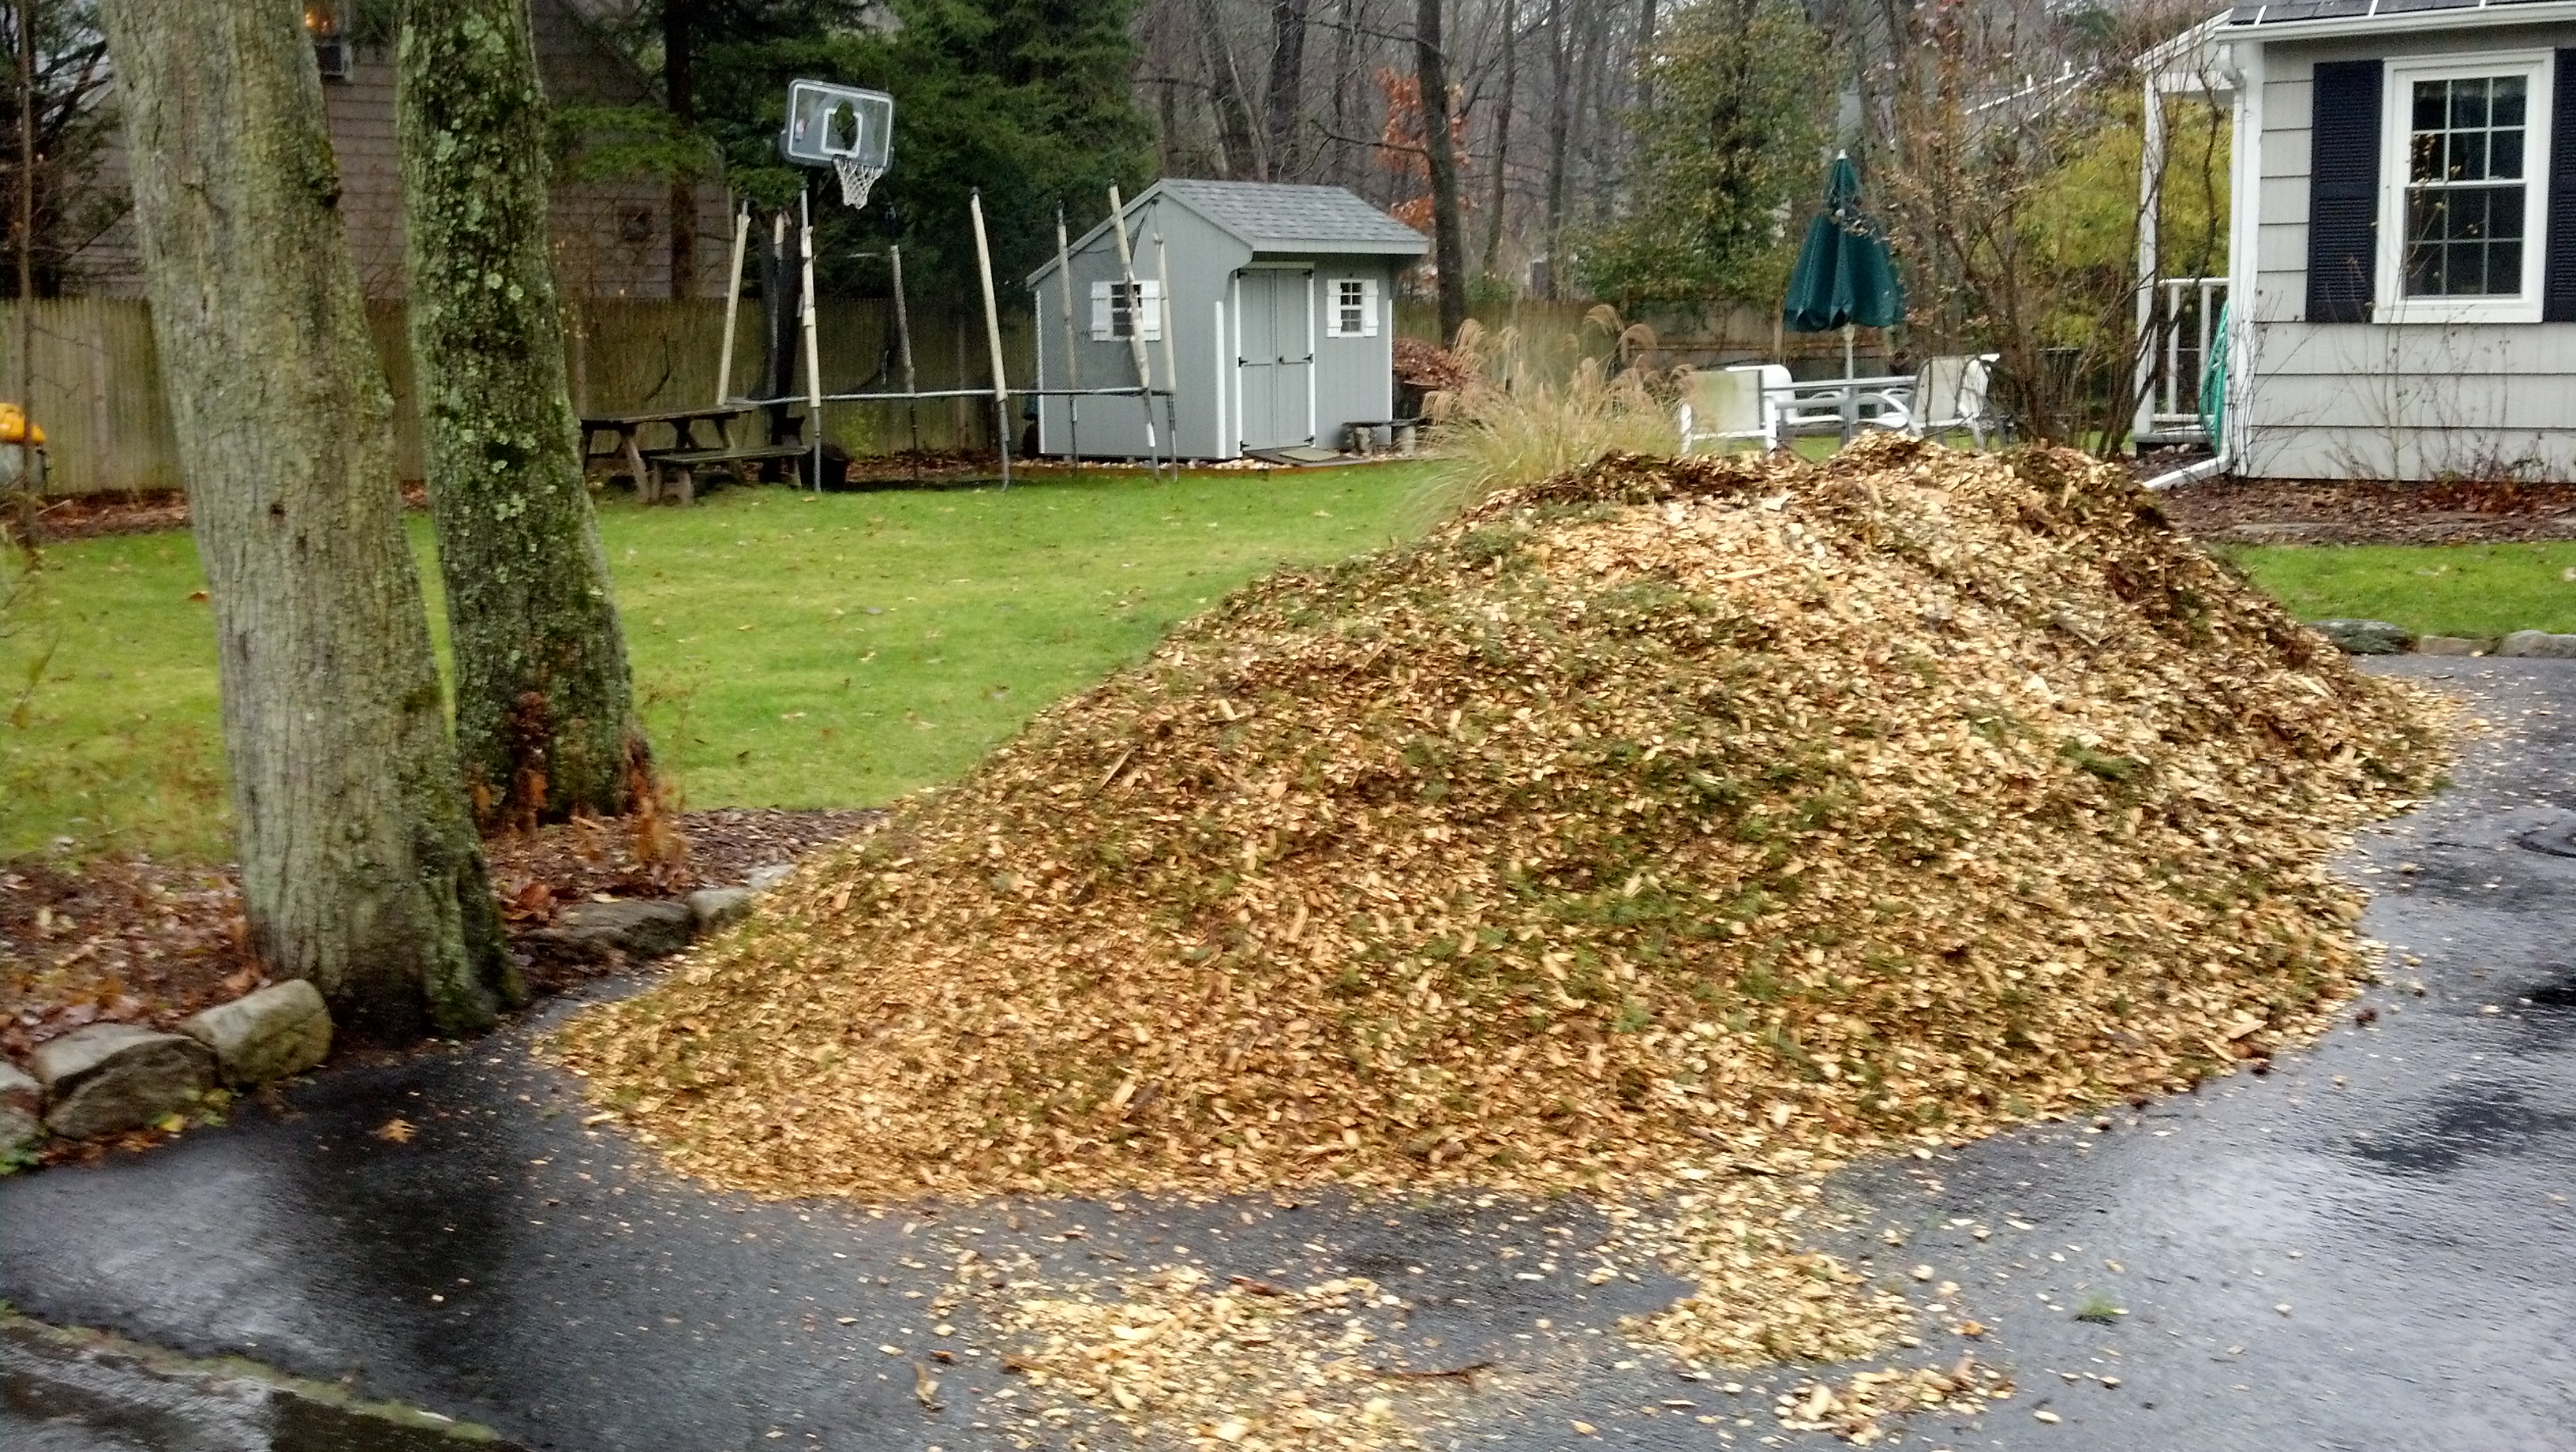 Image of Pile of cheap wood chips in backyard